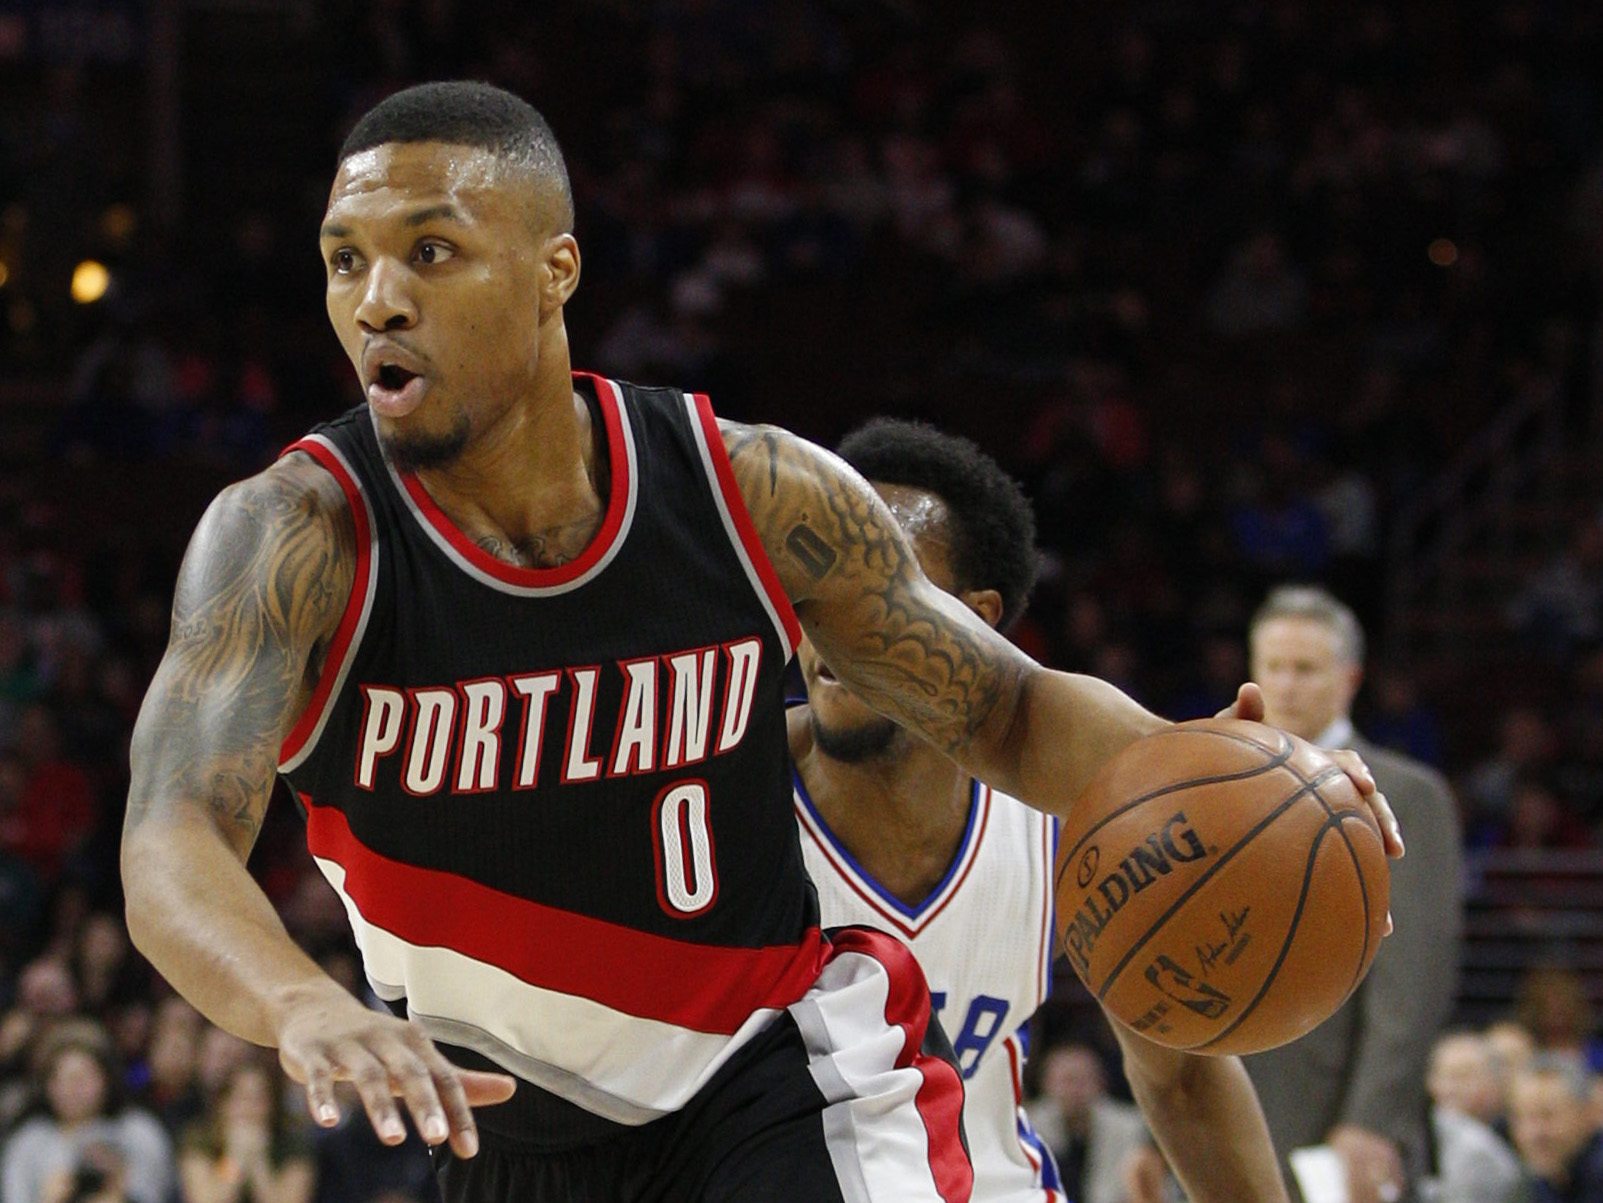 Portland Trail Blazers' Damian Lillard in action during the first half of an NBA basketball game against the Philadelphia 76ers, Saturday, Jan. 16, 2016, in Philadelphia. The 76ers won 114-89.